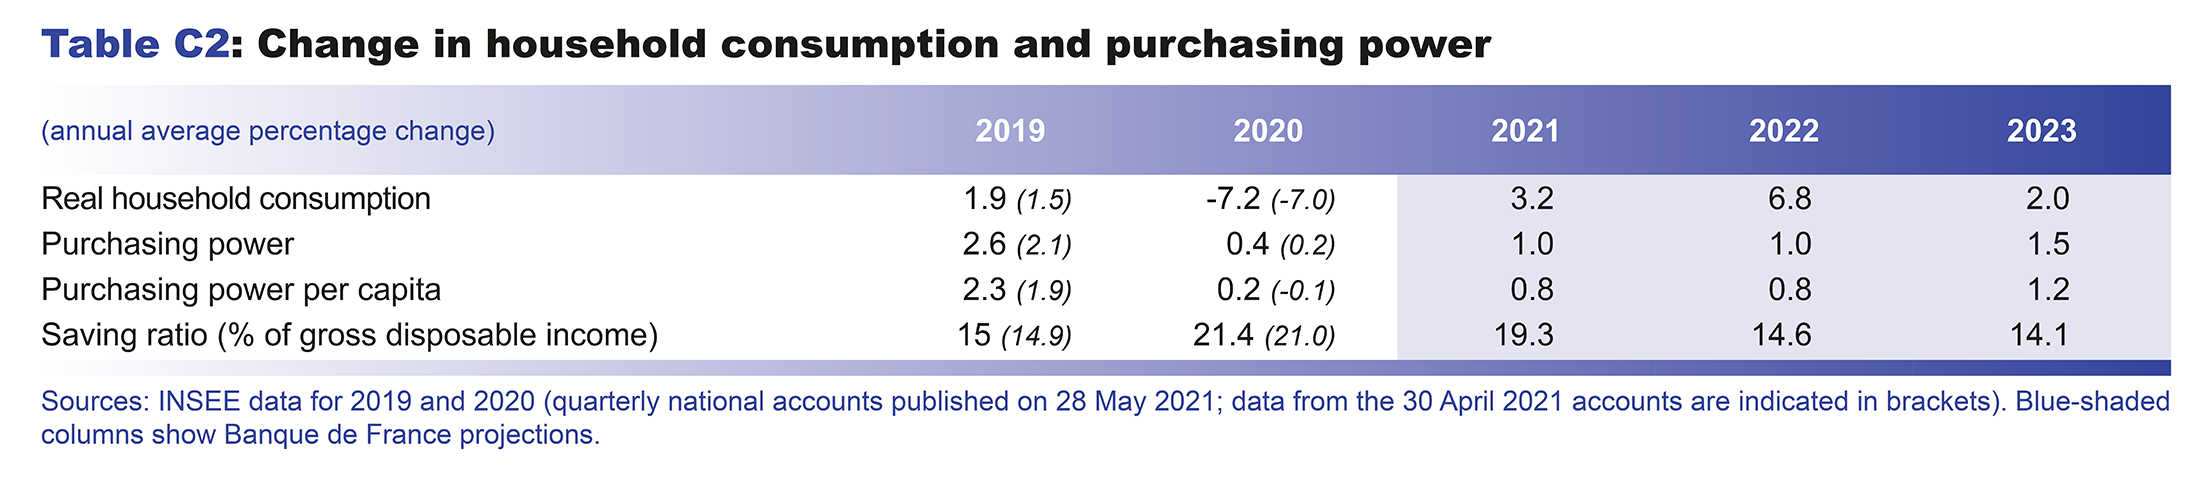 Macroeconomic projections – June 2021 - Change in household consumption and purchasing power